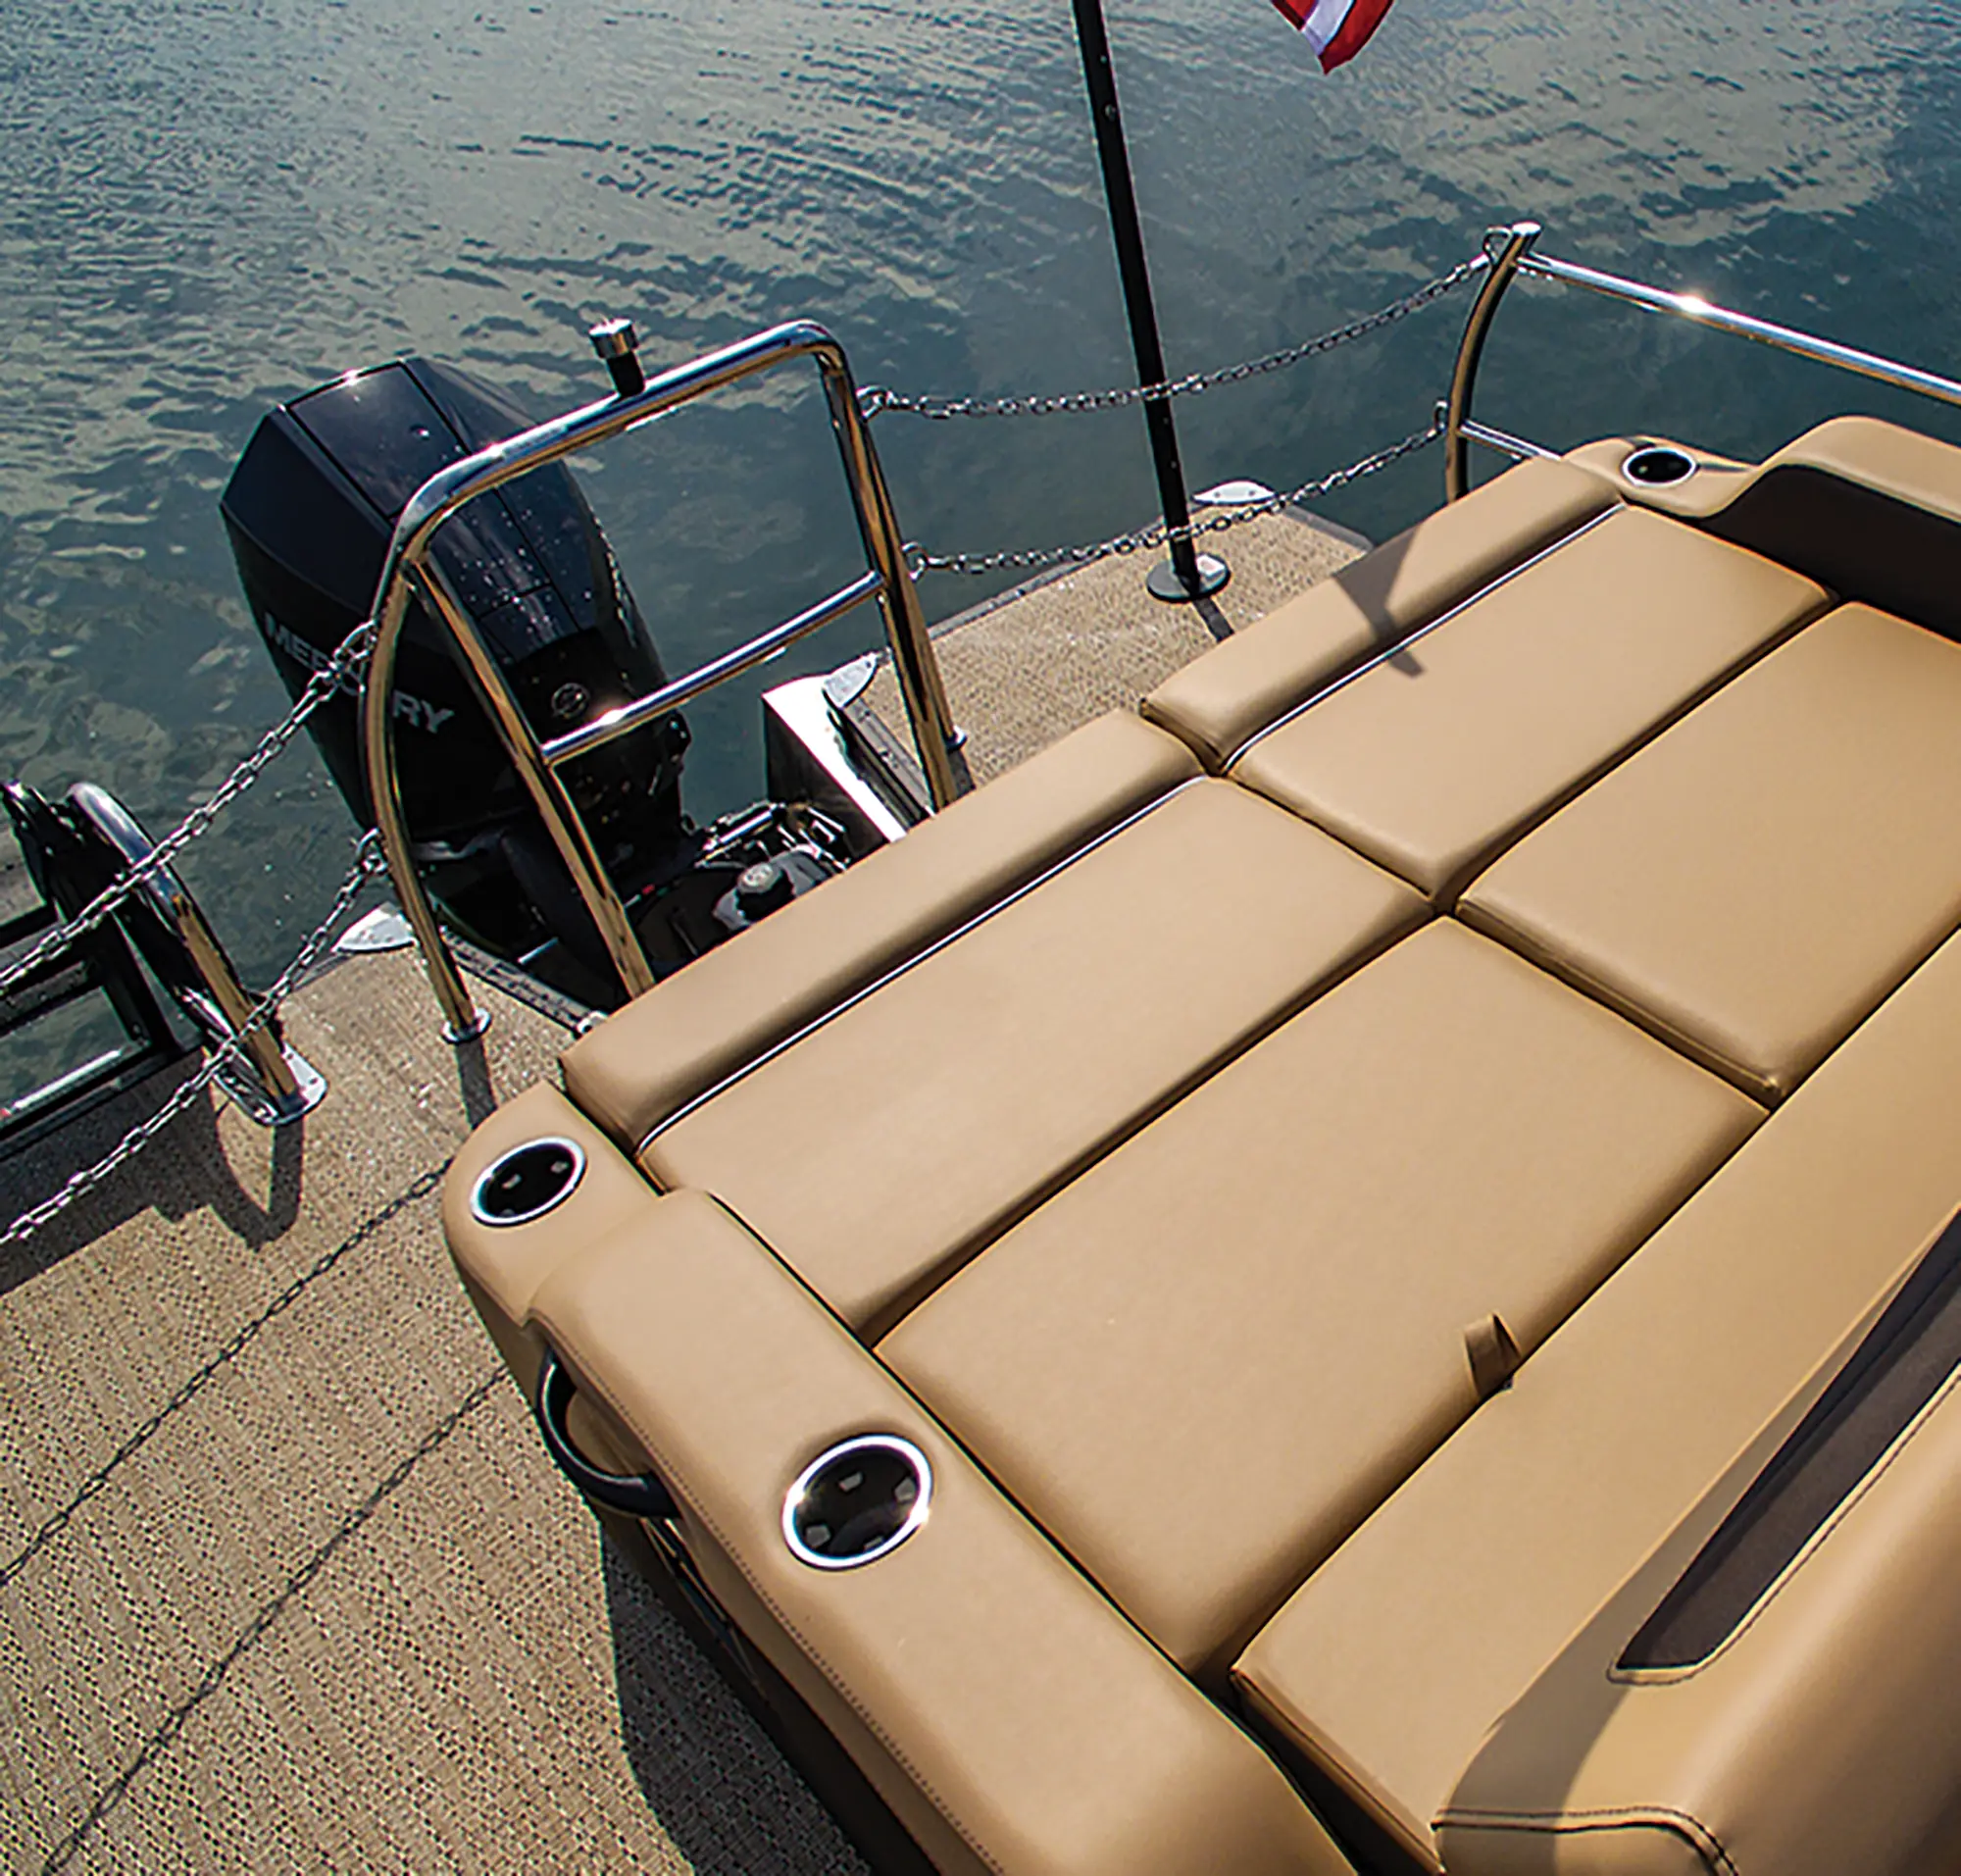 Landscape close-up angle photograph view of the Mercury 200 V6 Outboard engine equipped onto the Barletta Cabrio C22UC pontoon motorboat vehicle and a passenger lounge couch with cupholders